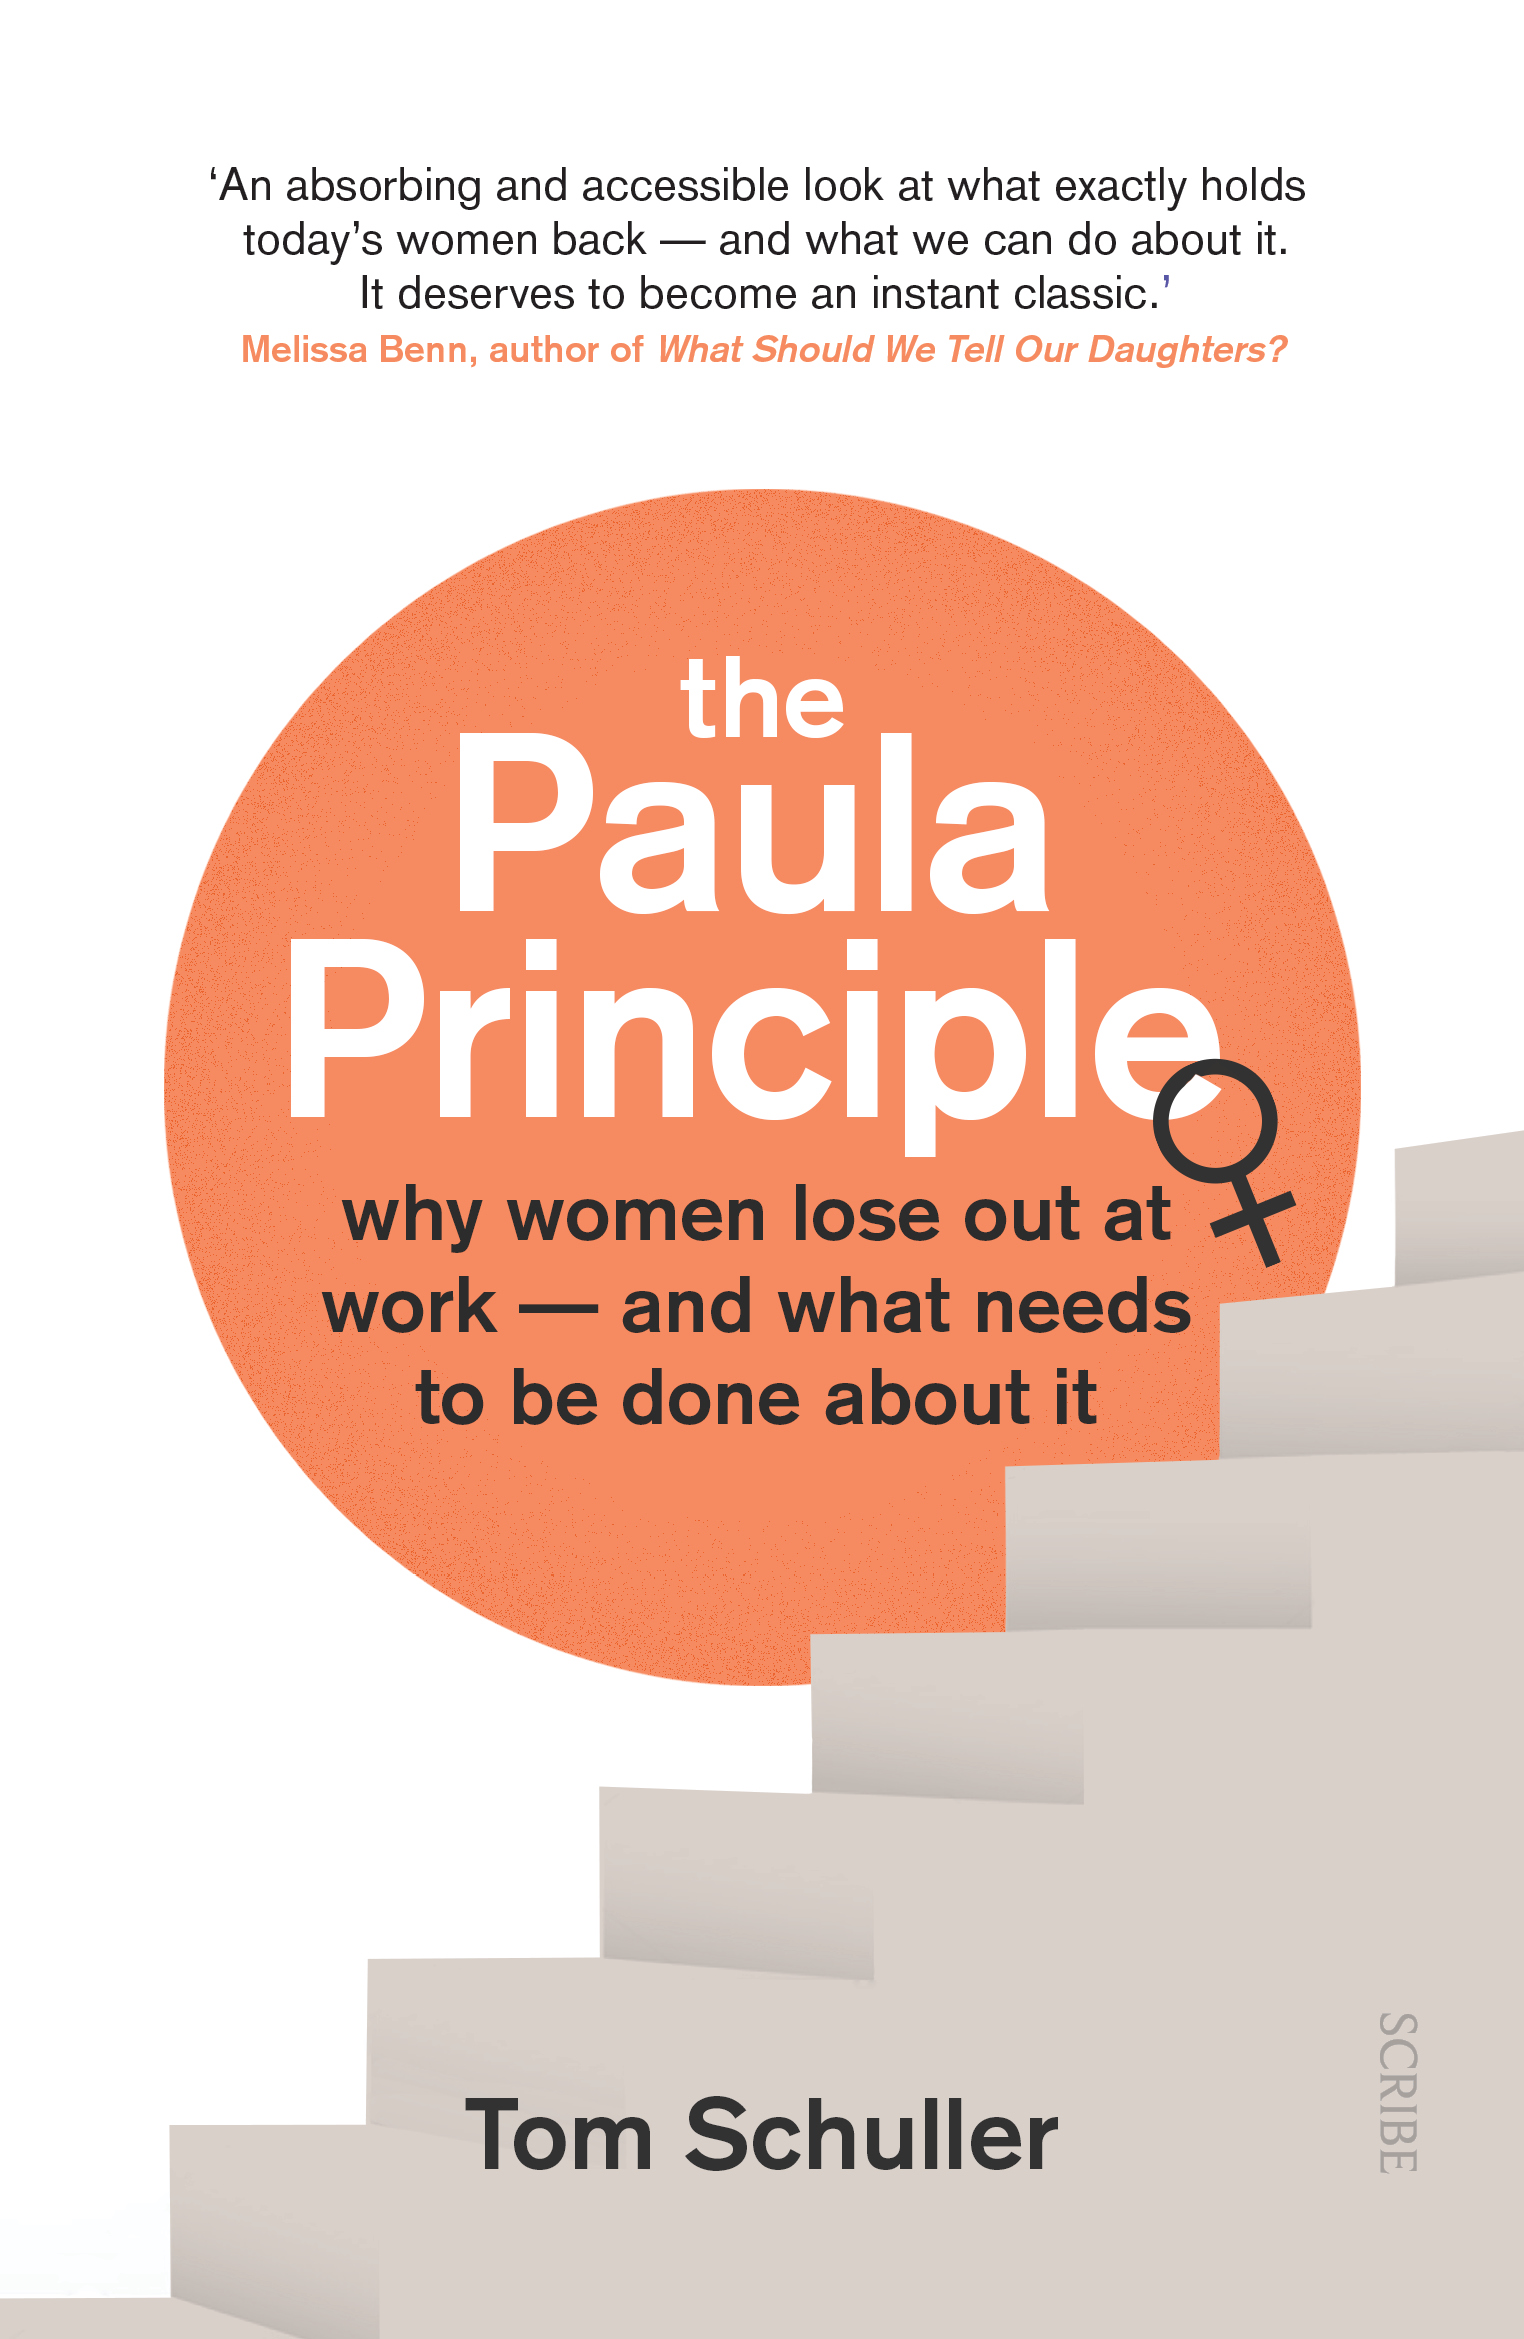 The Paula Principle | UCL Institute of Education and Birkbeck) Tom (Independent consultant Schuller